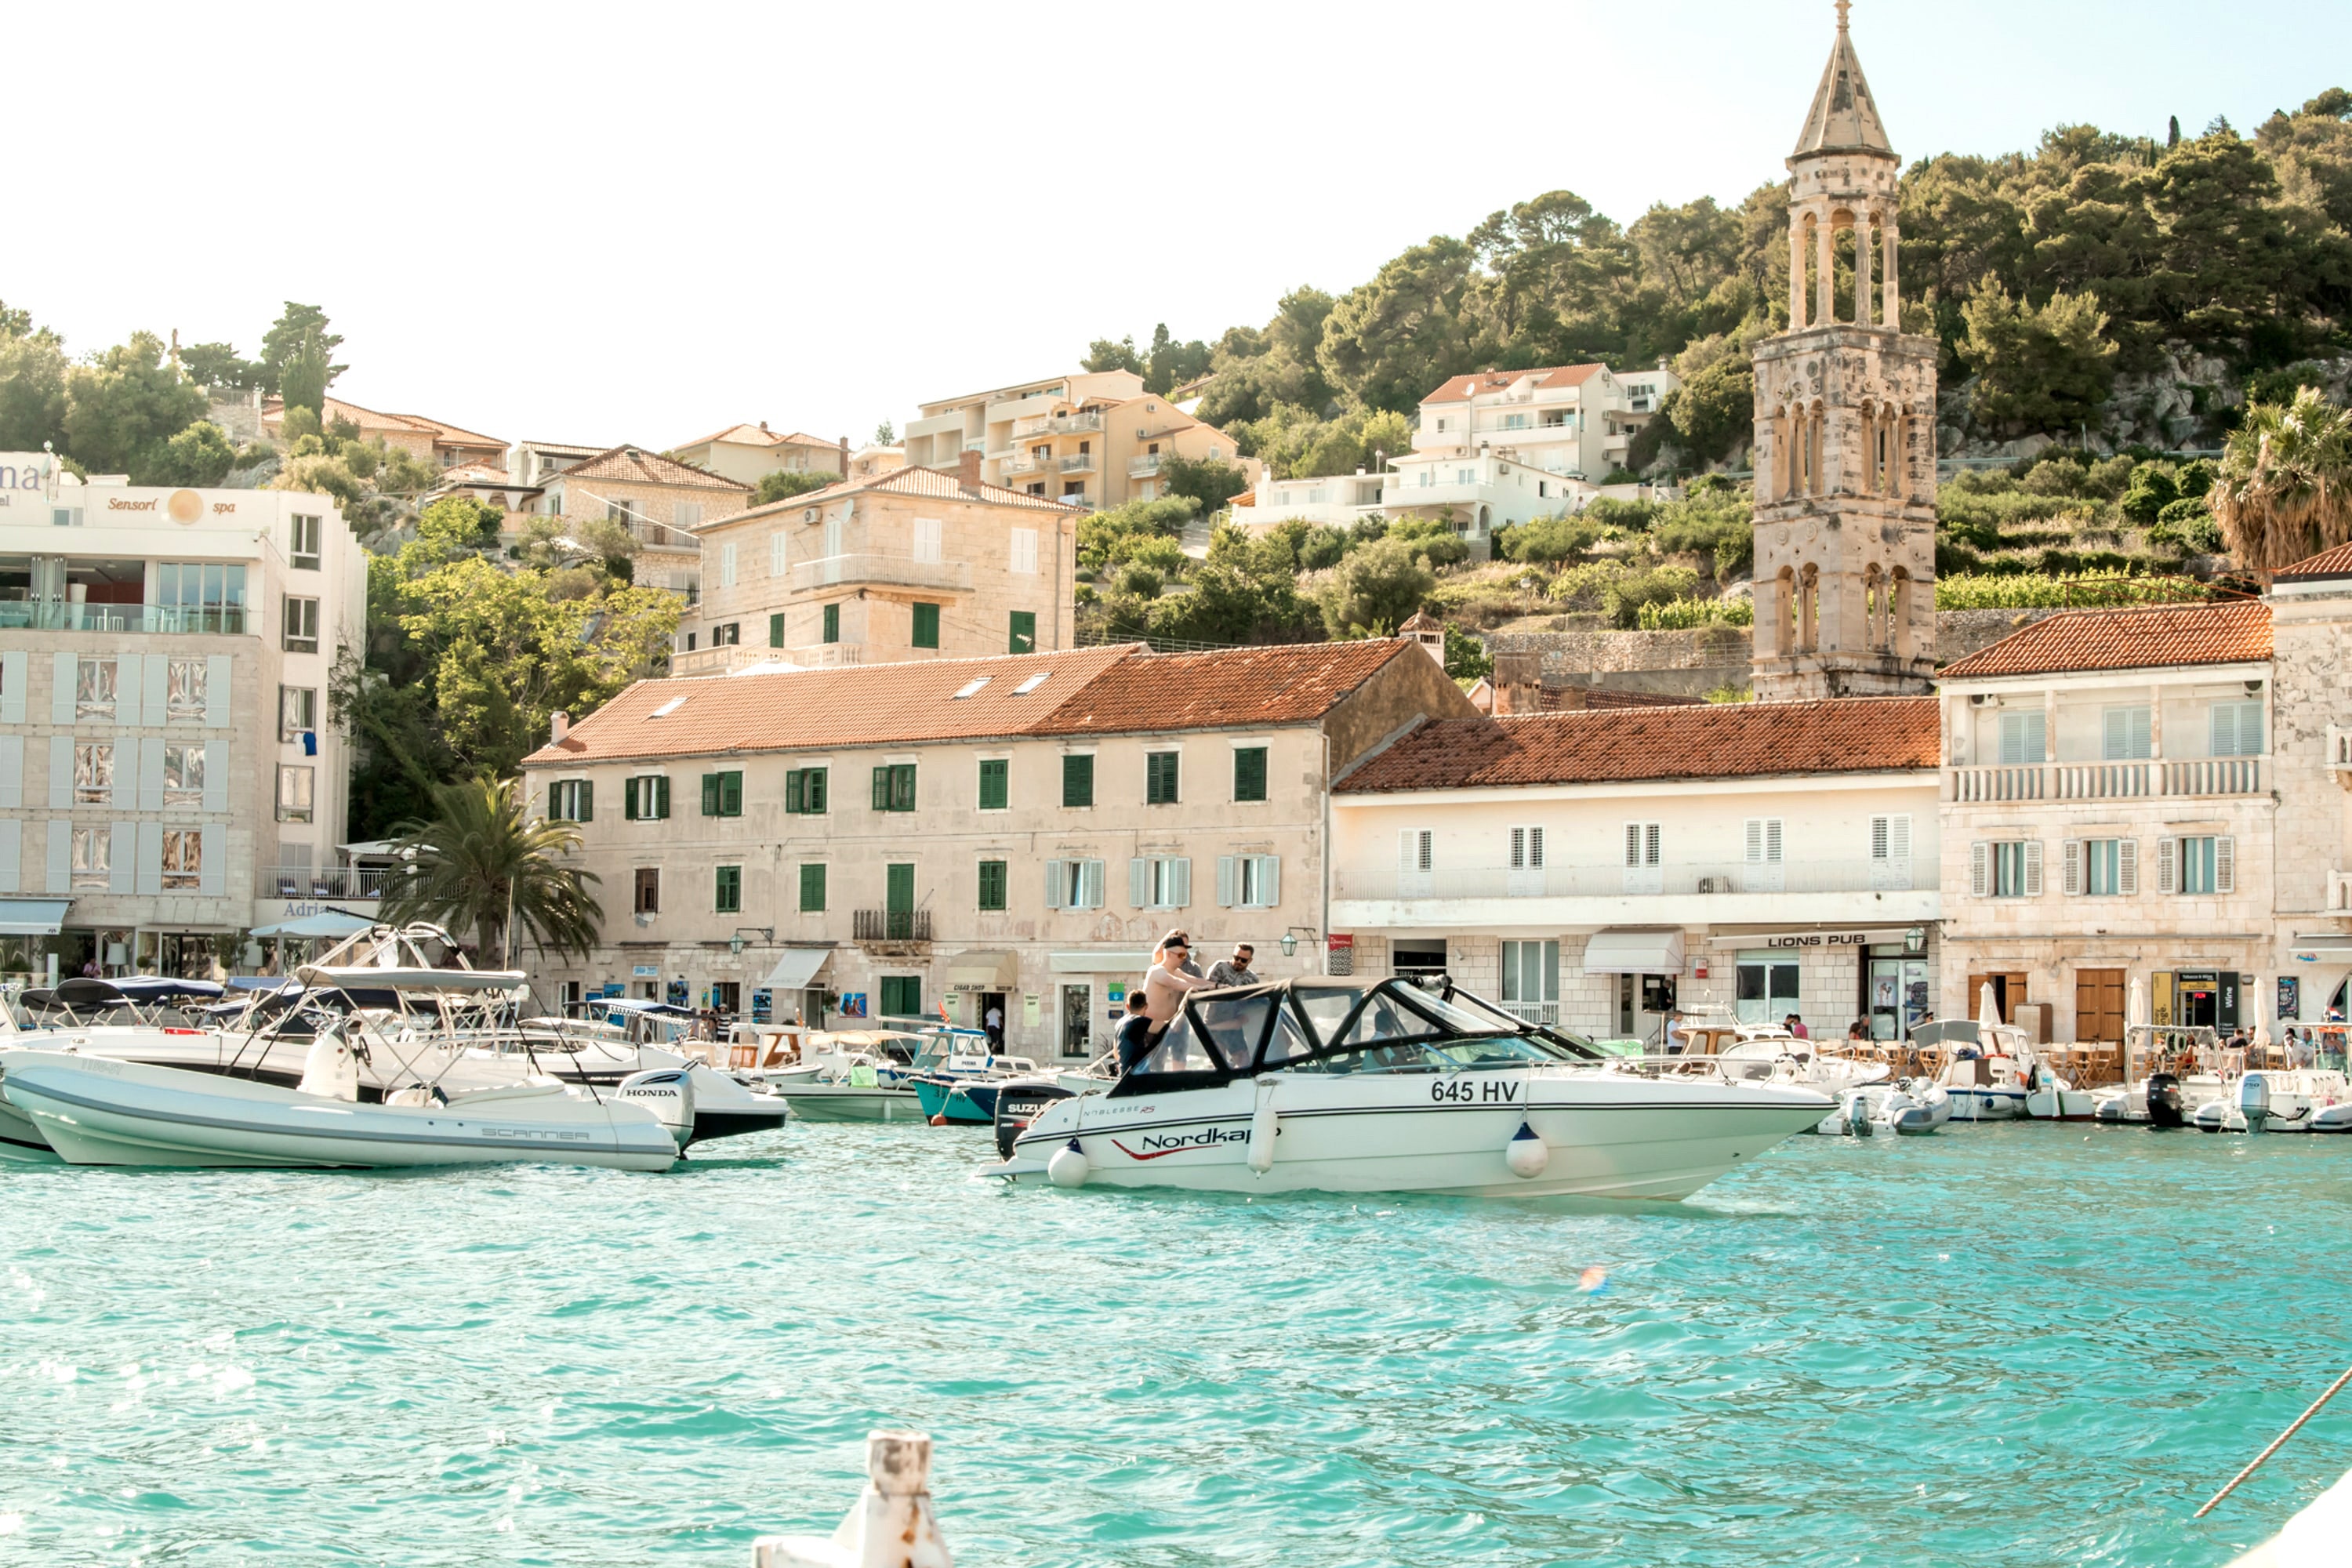 <p>With warm summers and mild winters, the island of Hvar is the sunniest spot in <a href="https://www.cntraveler.com/gallery/croatia-best-islands?mbid=synd_msn_rss&utm_source=msn&utm_medium=syndication">Croatia</a>—there are over 2,800 hours of sunshine annually. It may be known for its beaches and turquoise water, but there’s another side to this resort island. From the town of Hvar on the island’s southern shore, make the slow, uphill climb to Tvrđava Fortica, a 13th-century fortress with the best views around.</p> <p><strong>Pro tip</strong>: To see Hvar’s spectacular fields of lavender in full bloom, visit in early summer. The harvest takes place in late July, but you can buy all sorts of scented souvenirs in the local markets year-round.</p> <p><strong>Getting there</strong>: The Split Airport is just a 2.5-hour flight from <a href="https://www.cntraveler.com/destinations/london?mbid=synd_msn_rss&utm_source=msn&utm_medium=syndication">London</a>. From there, take a cab 20 minutes to the ferry station and board a catamaran or ferry to the town of Stari Grad. The entire journey takes about 90 minutes.</p>